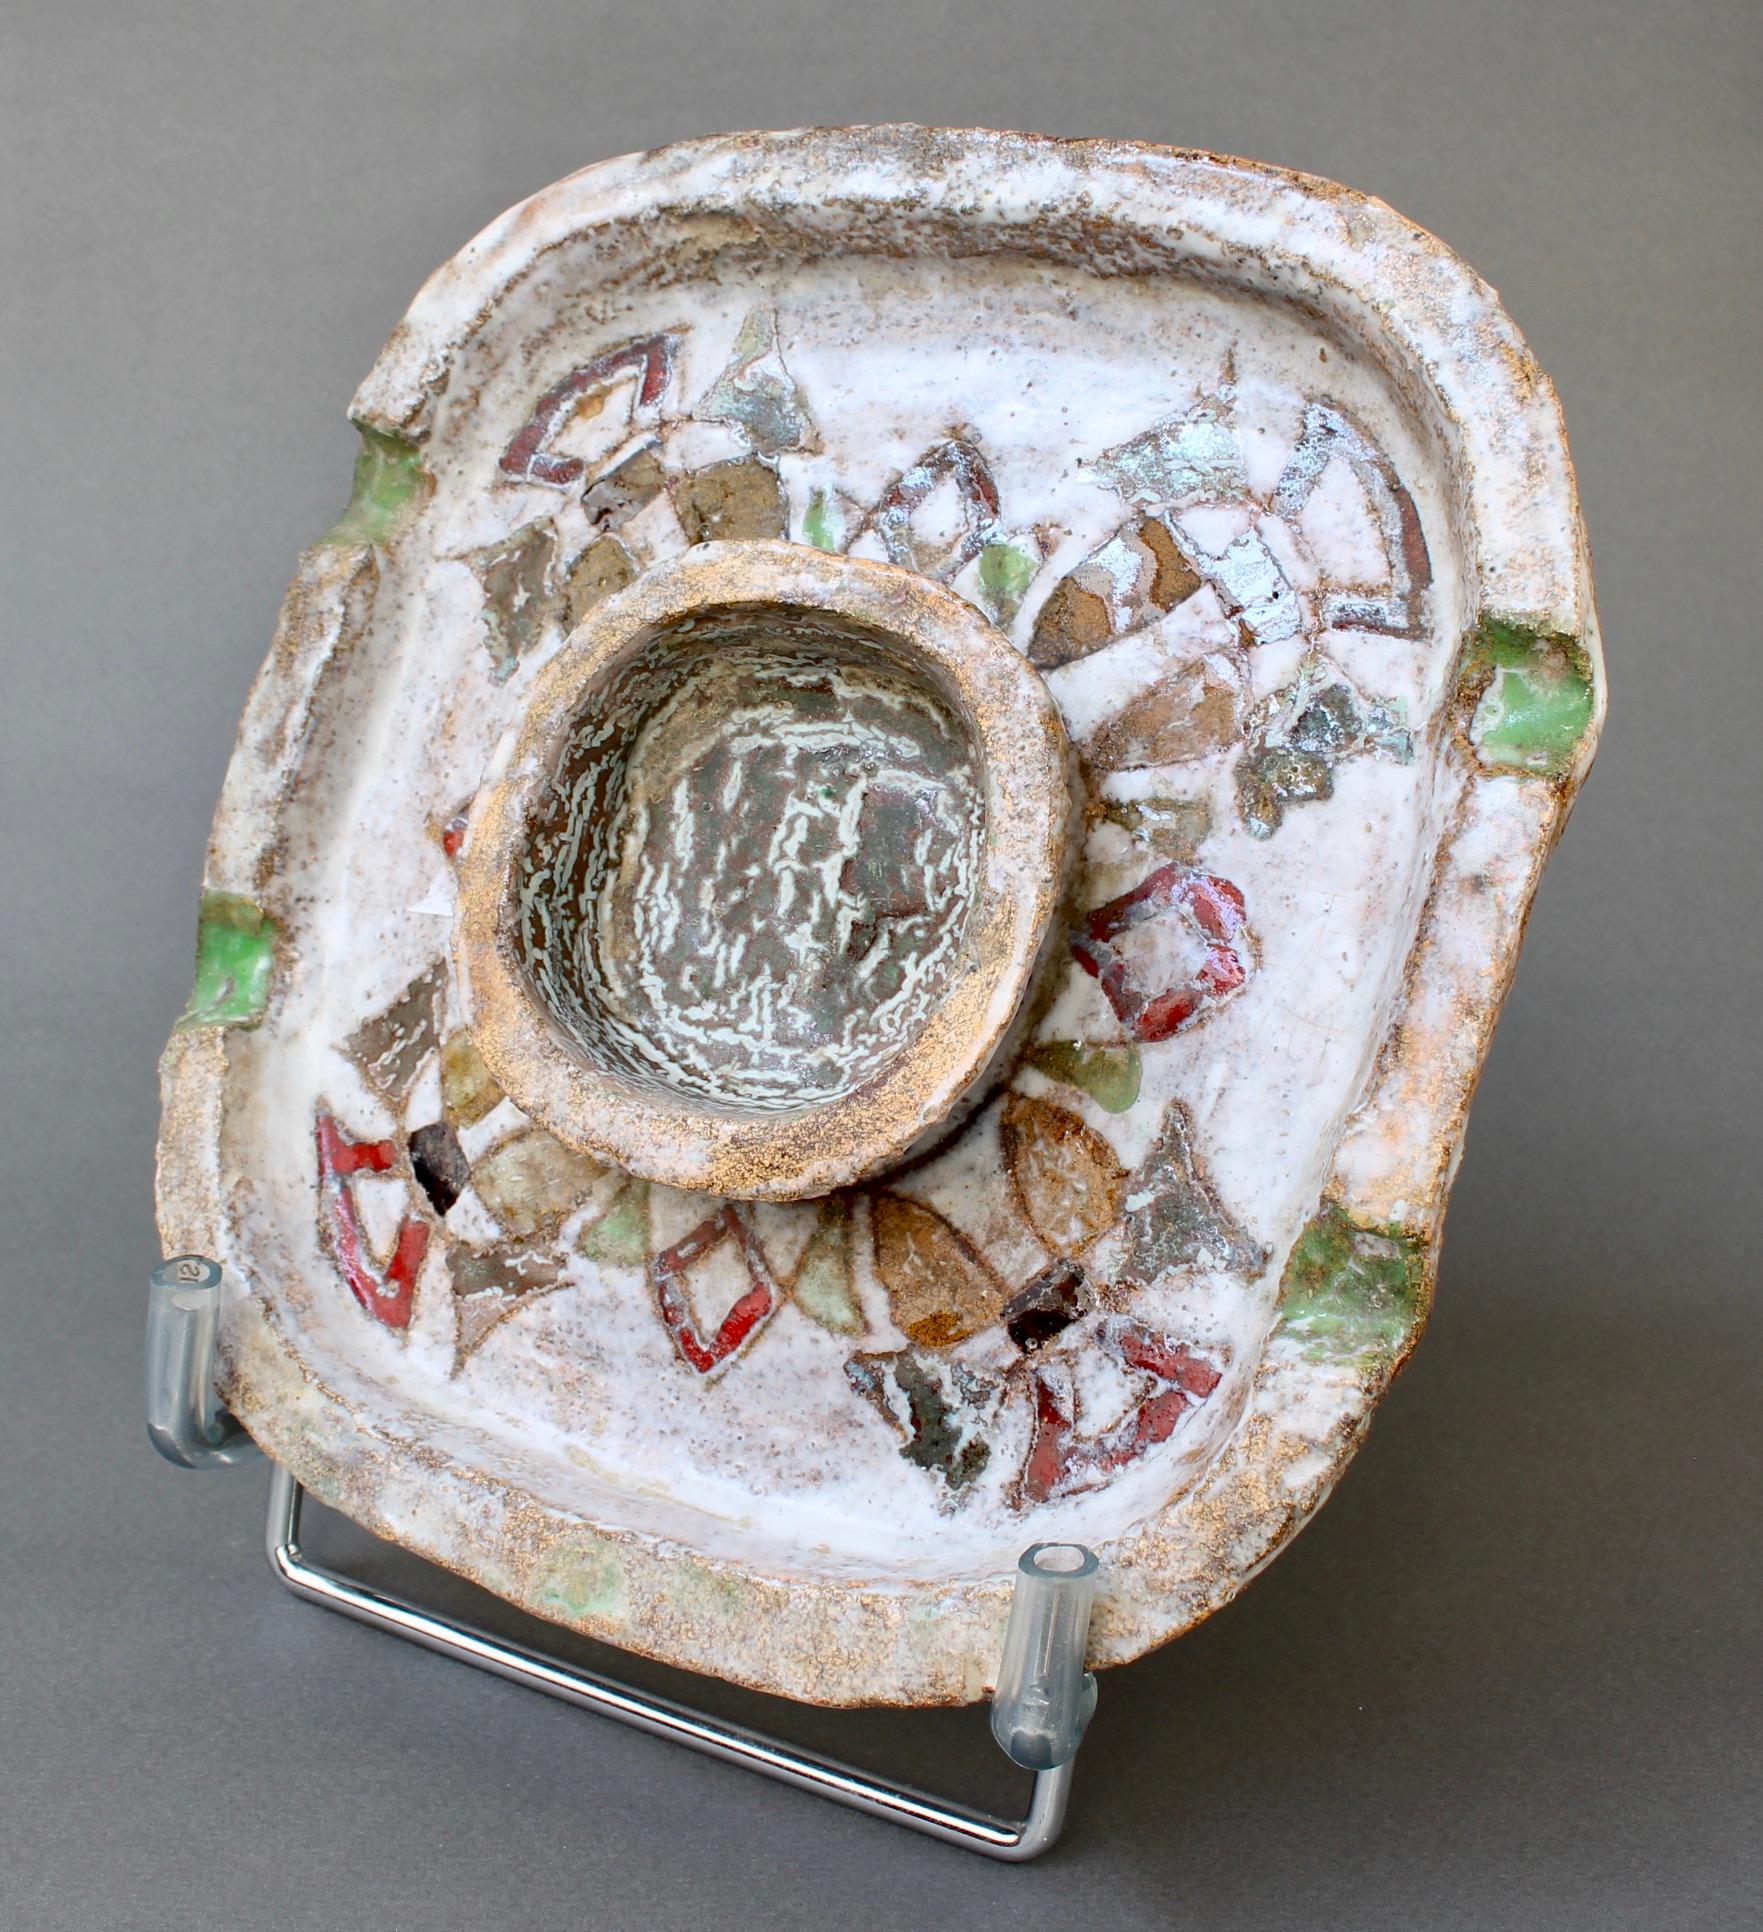 Decorative French vintage ceramic ashtray / vide-poche by Fernande Kohler, Vallauris (c. 1960s). Chamotte earthenware rounded-square form accented by hand-decorated coloured enamel in various geometric shapes. Rustic in appearance with Southern